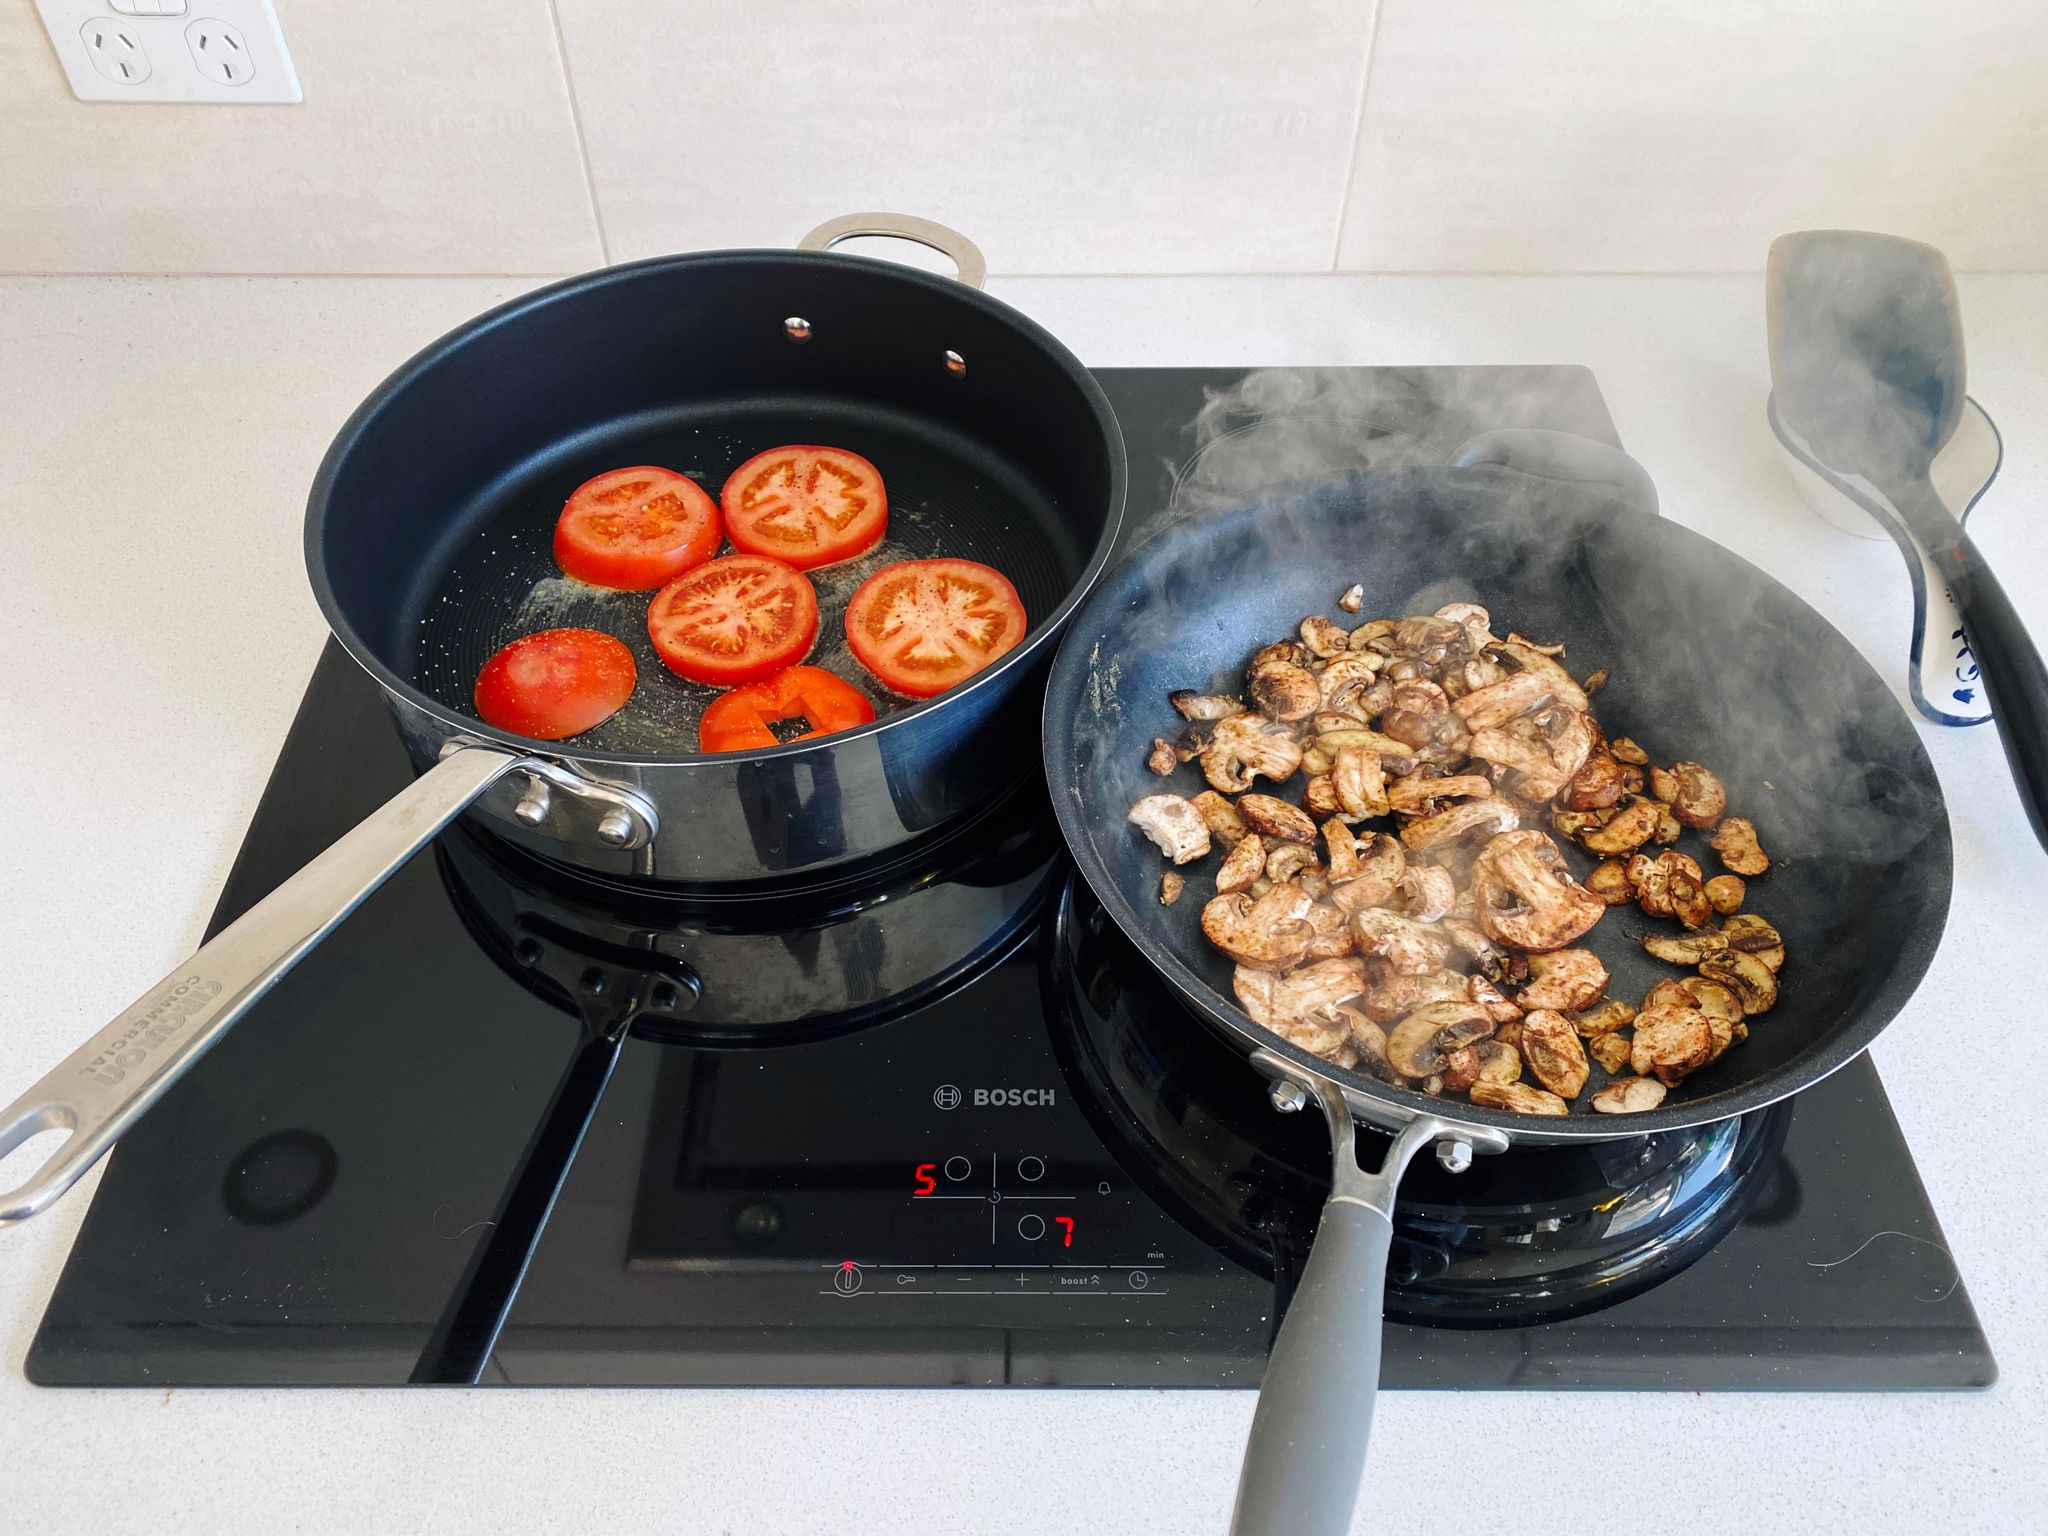 A photo of two frying pans on a stove, one with sliced tomatoes in it and the other with mushrooms.